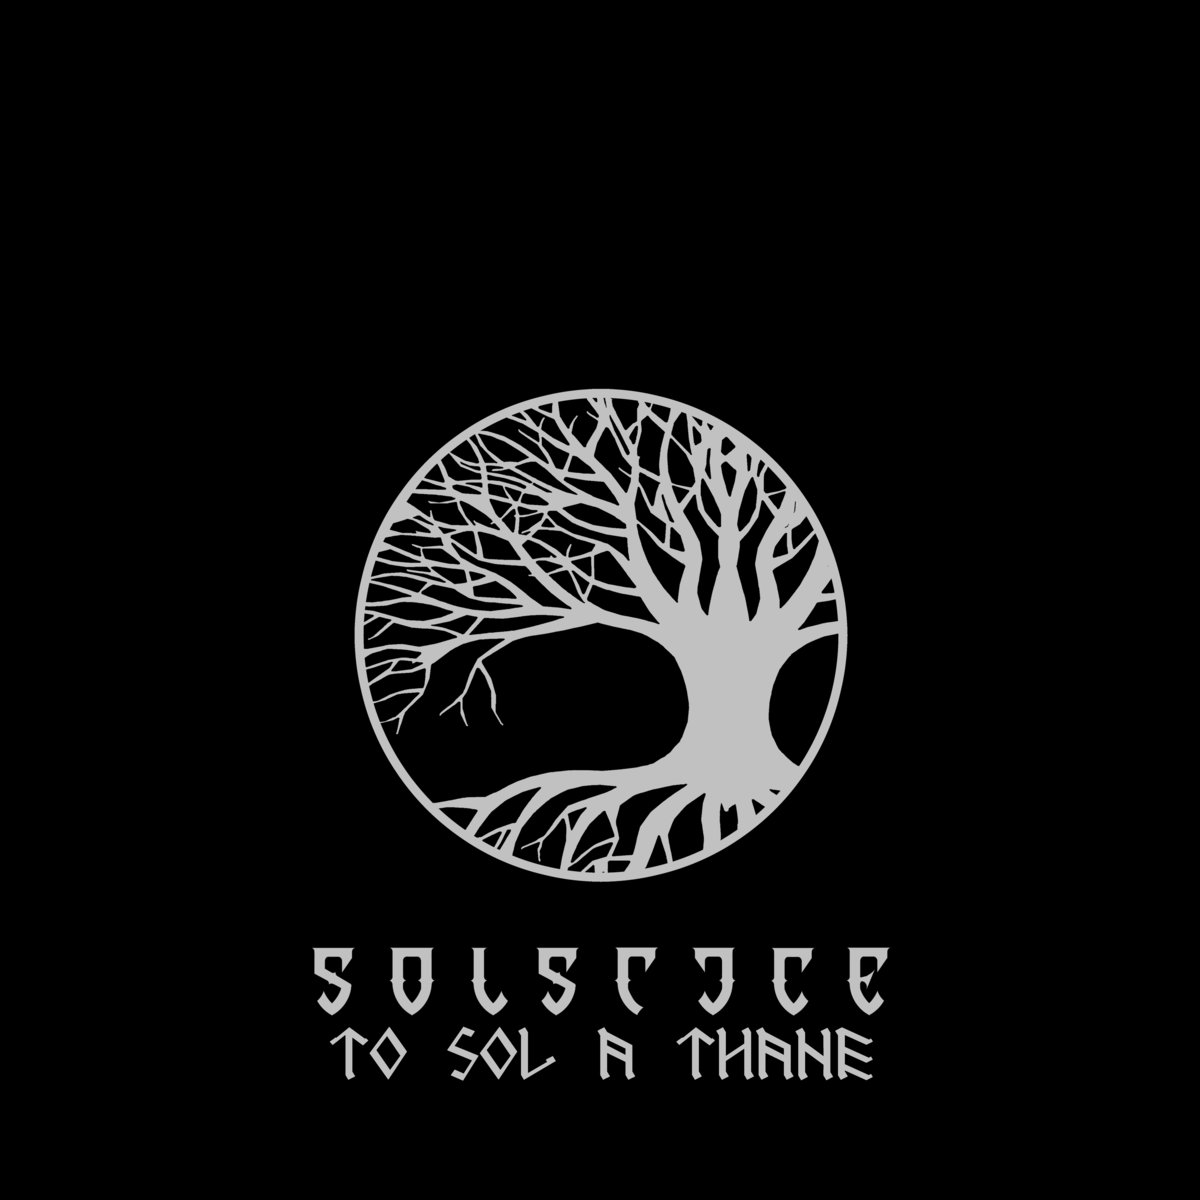 Solstice – To Sol A Thane